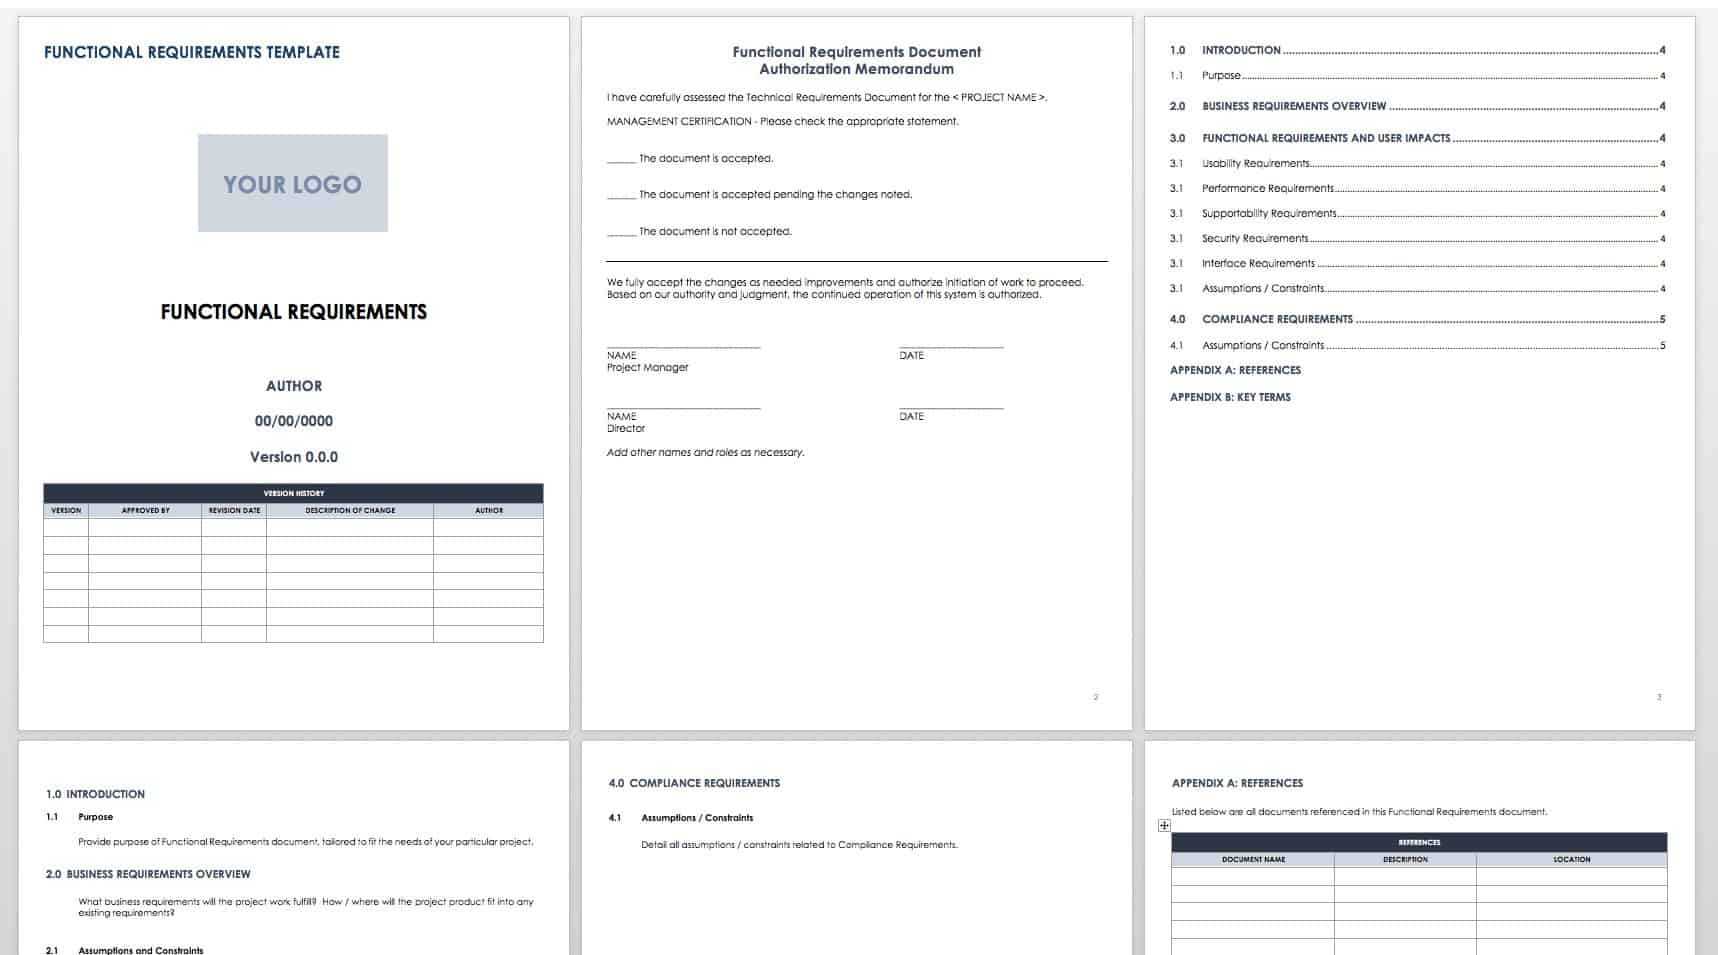 Free Functional Specification Templates | Smartsheet With Reporting Requirements Template